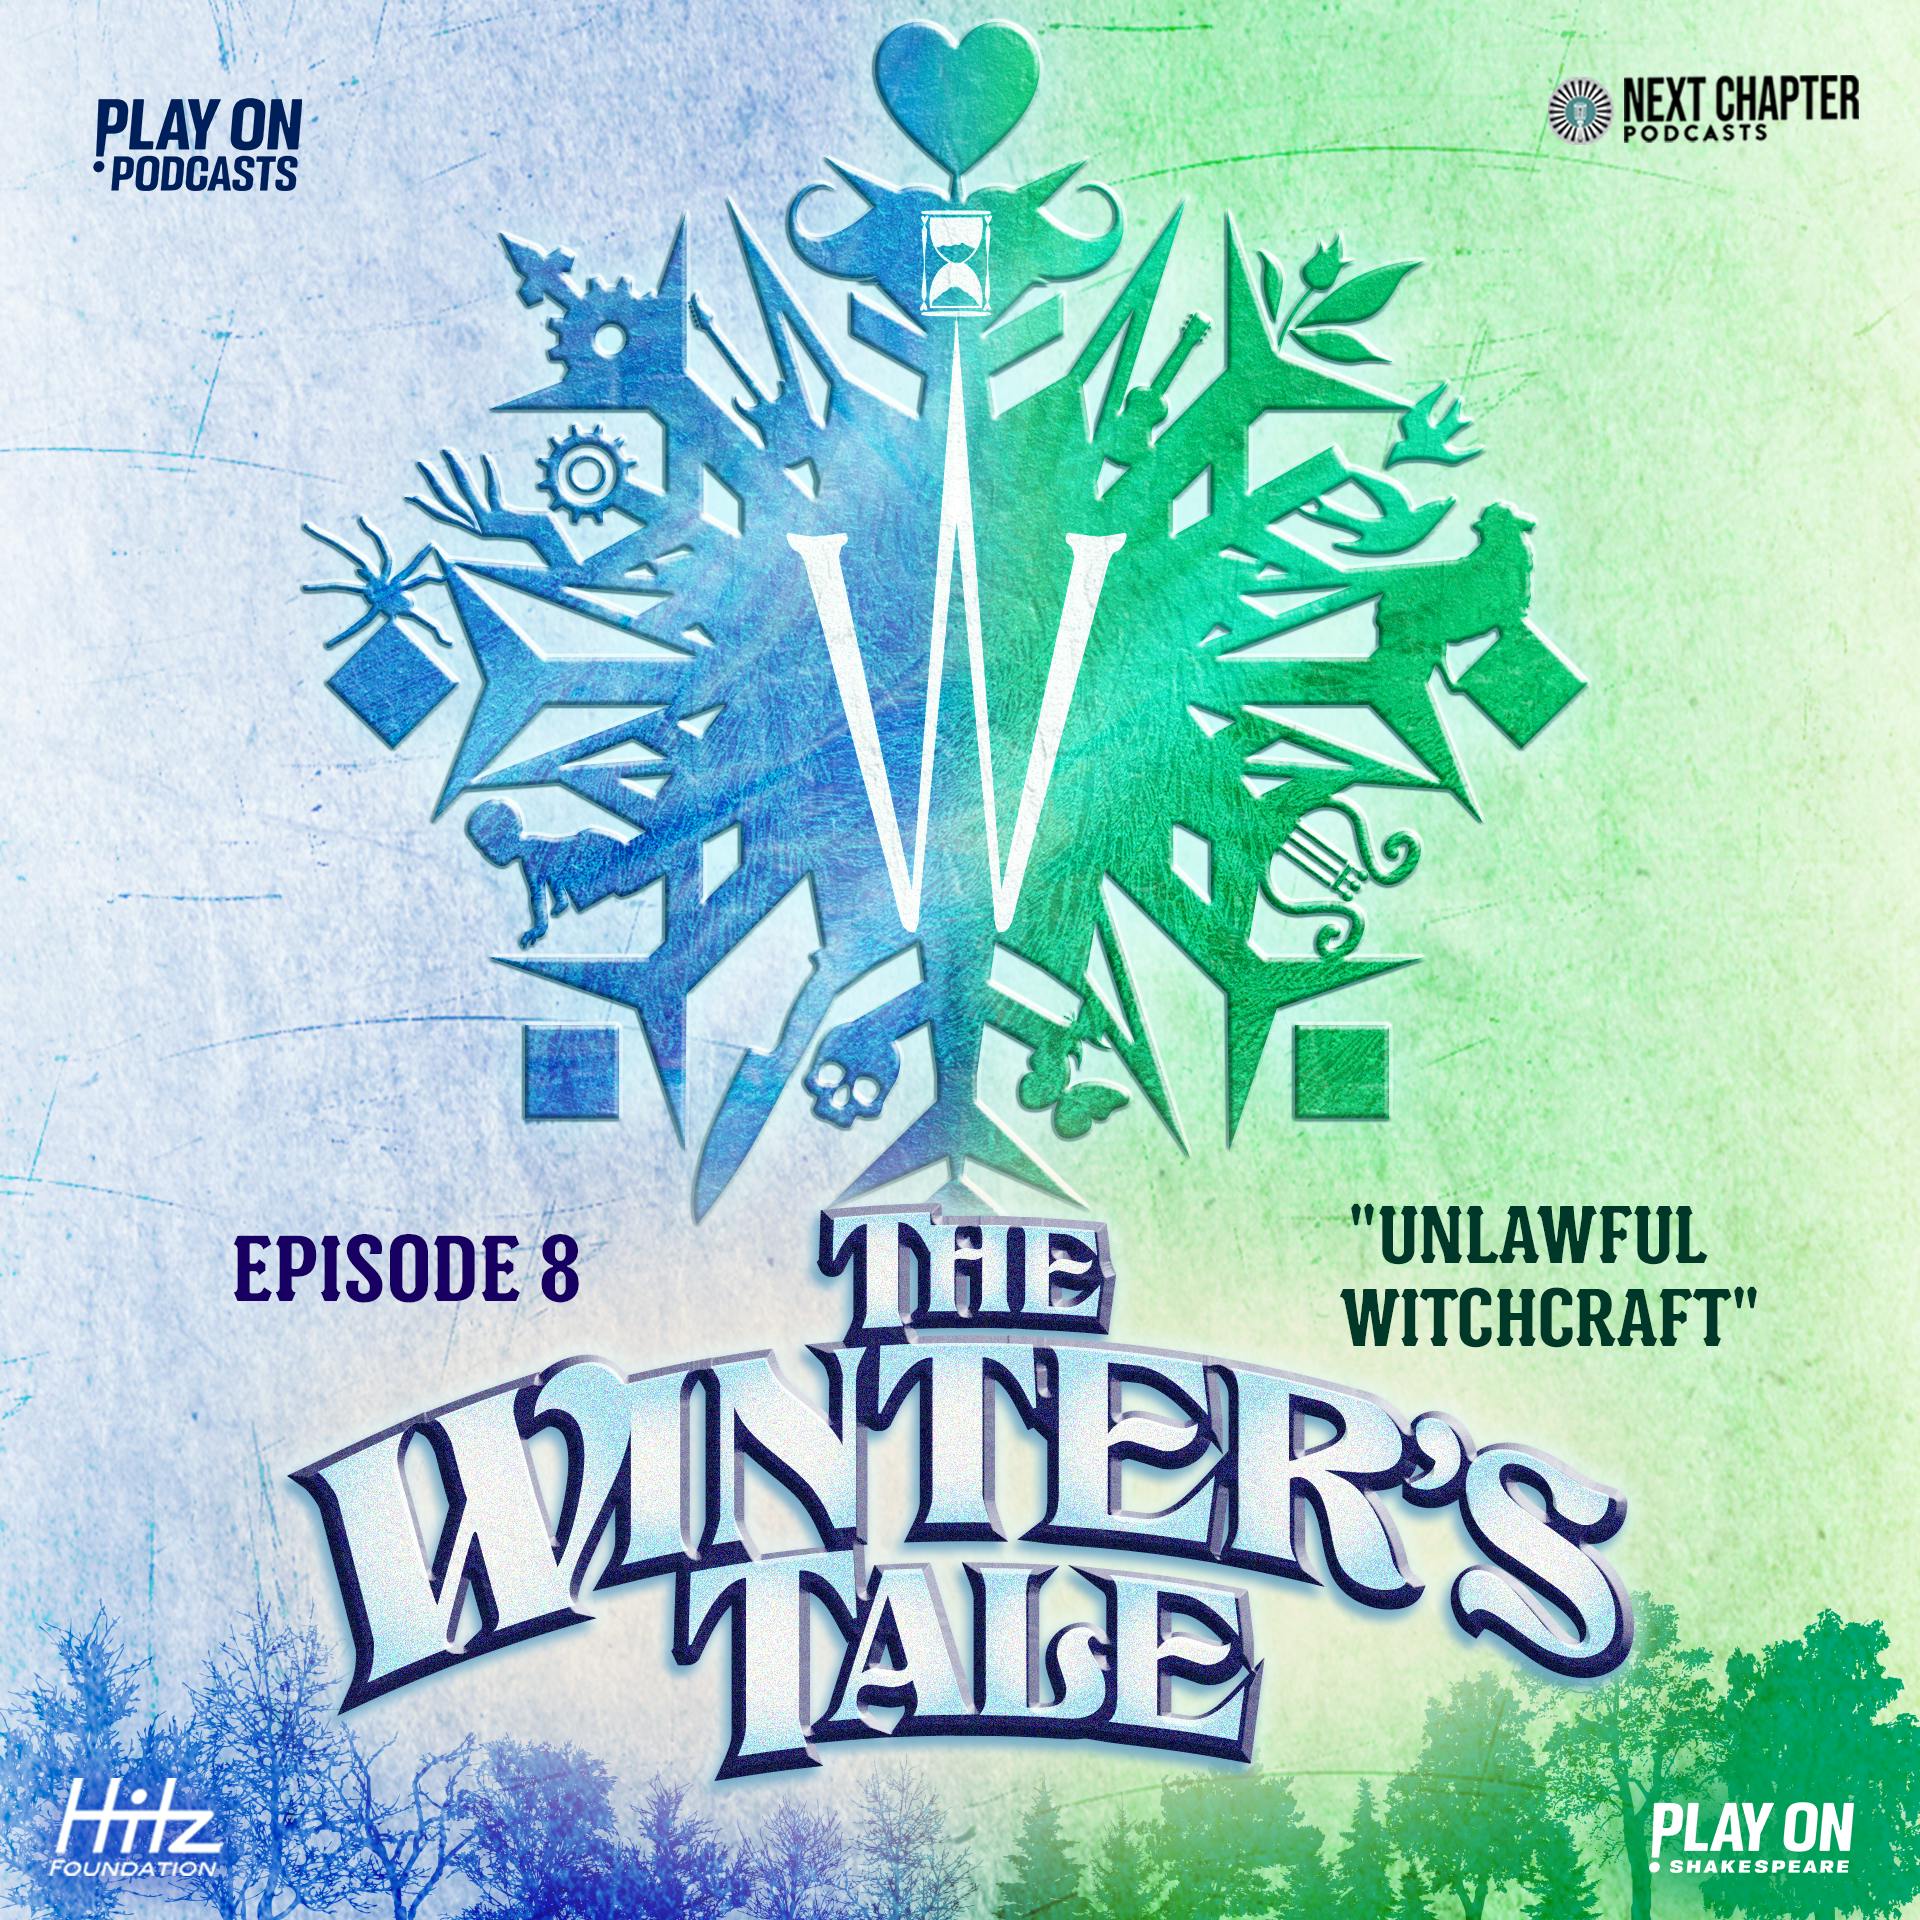 The Winter’s Tale - Episode 8 - Unlawful Witchcraft